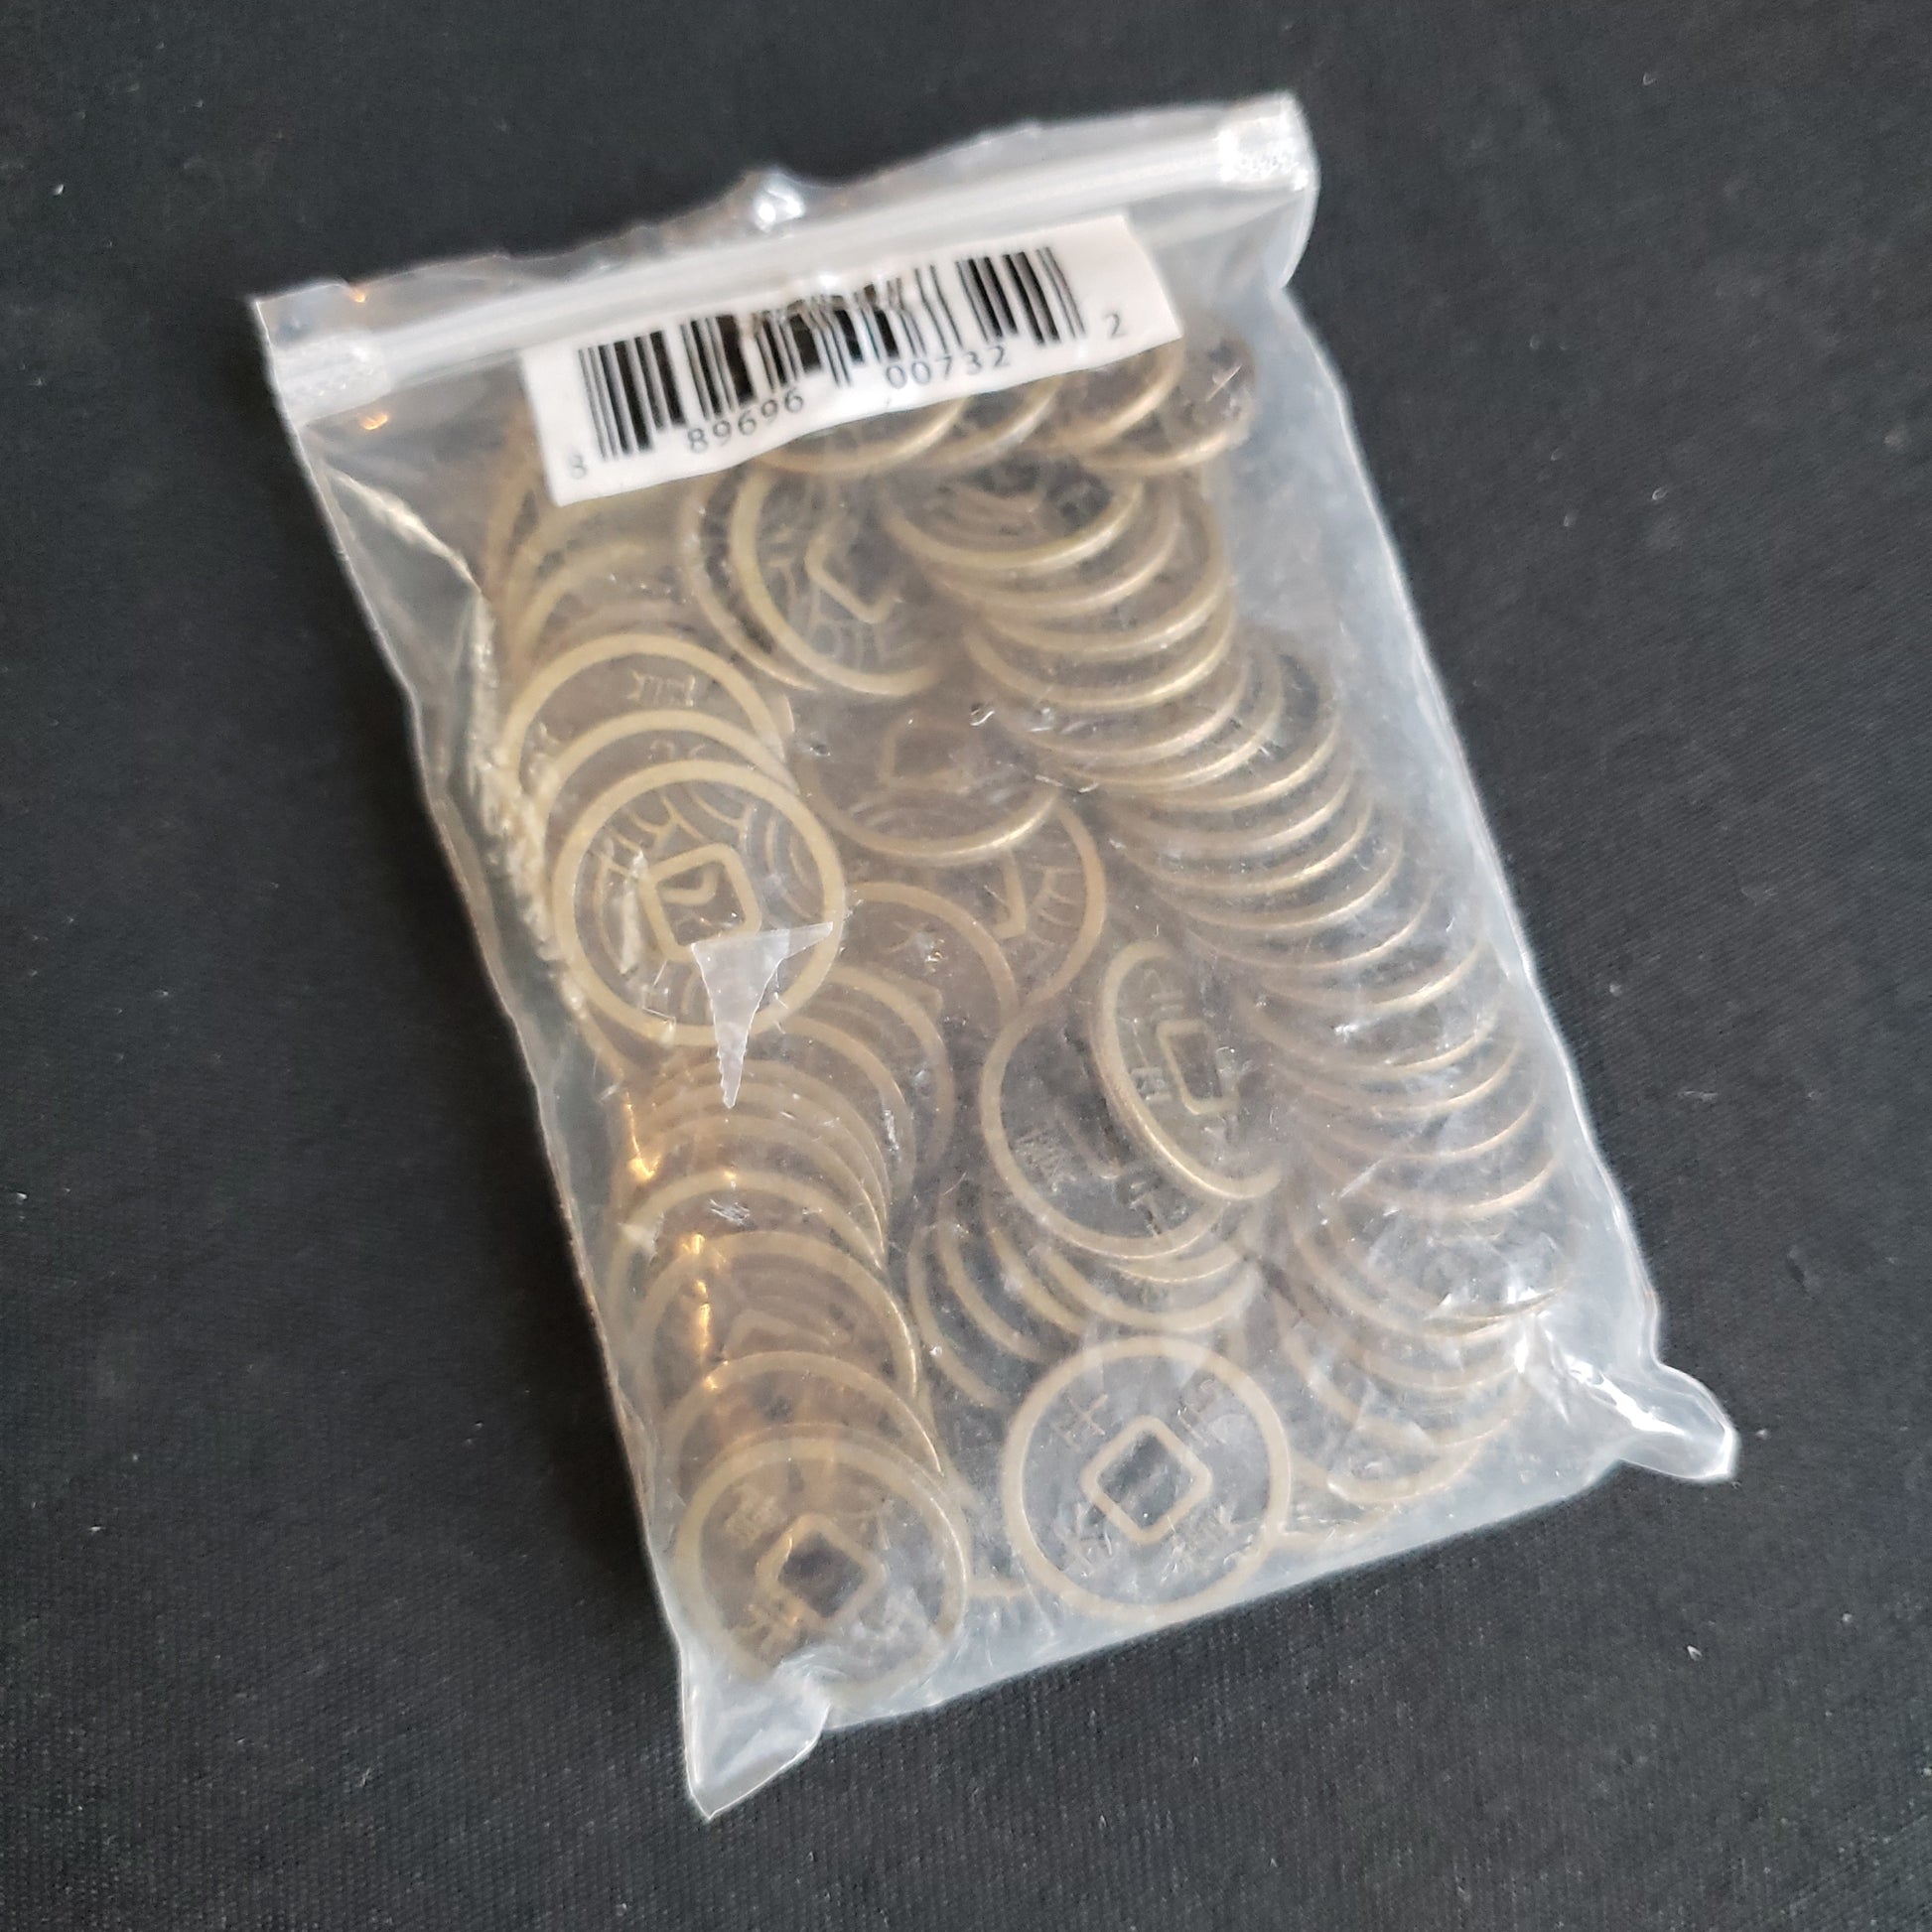 Image shows a clear plastic baggie with 65 metal coins for the Rising Sun board game in it